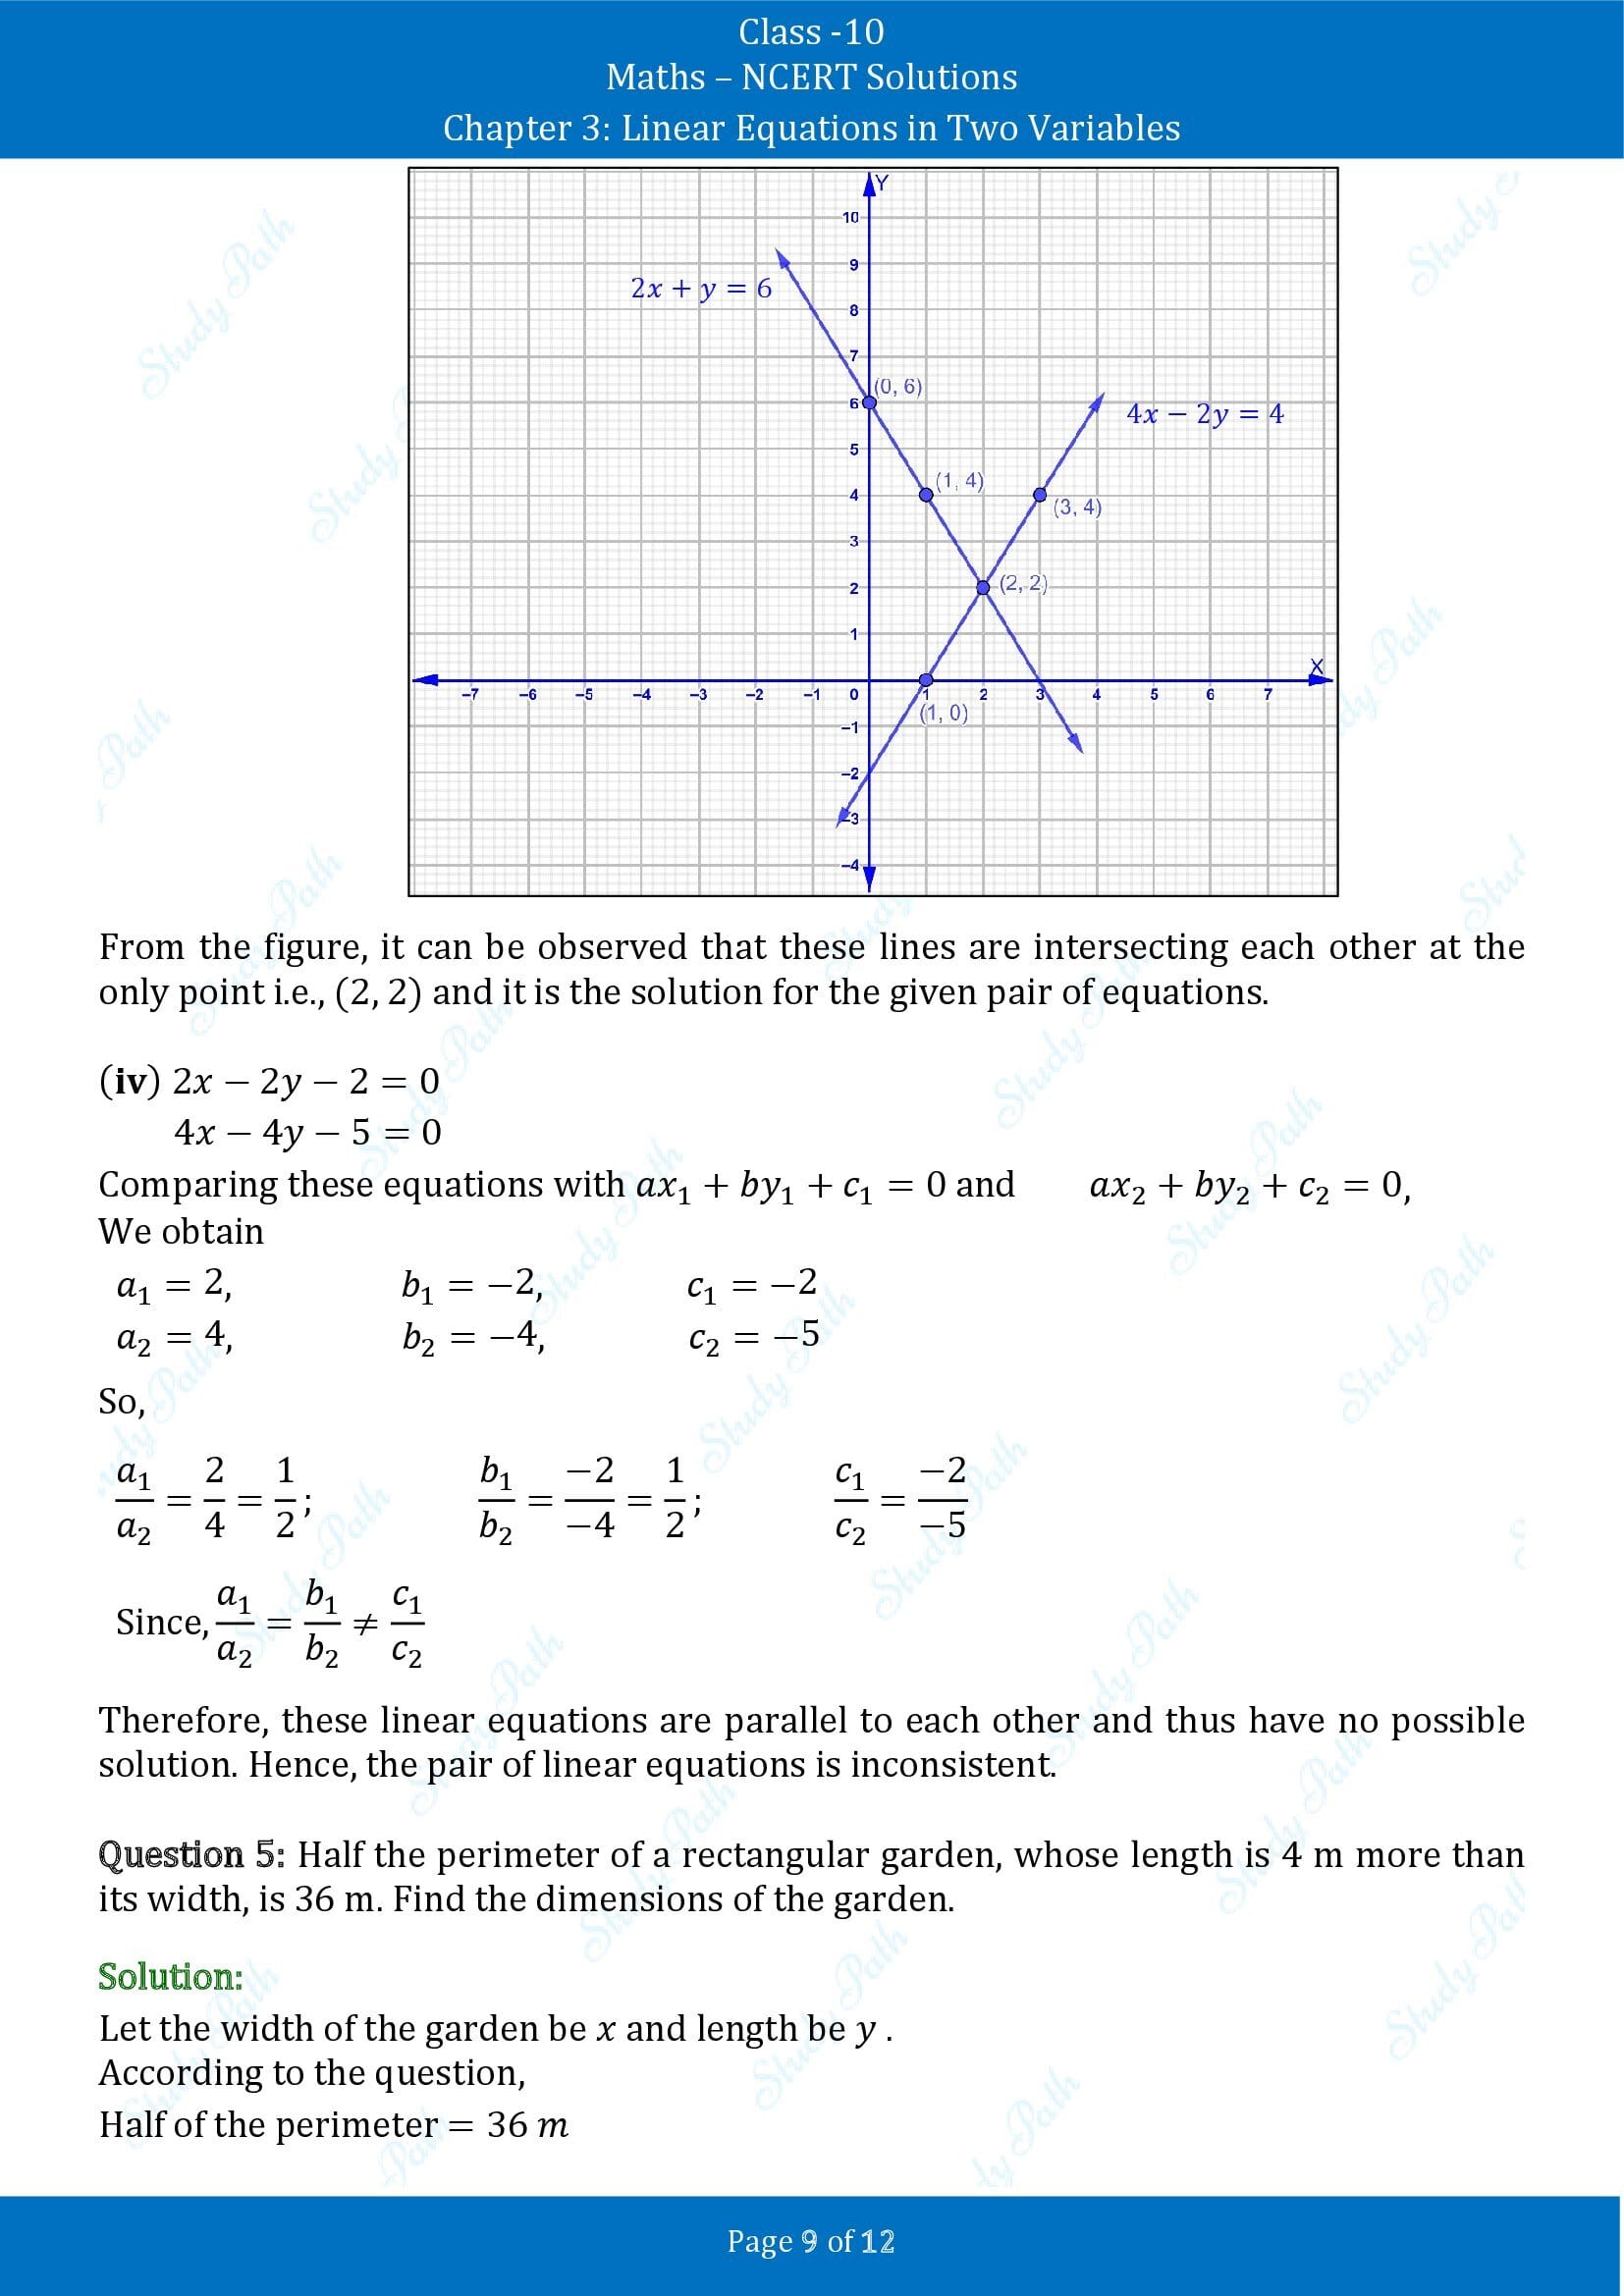 NCERT Solutions for Class 10 Maths Chapter 3 Linear Equations in Two Variables Exercise 3.2 00009